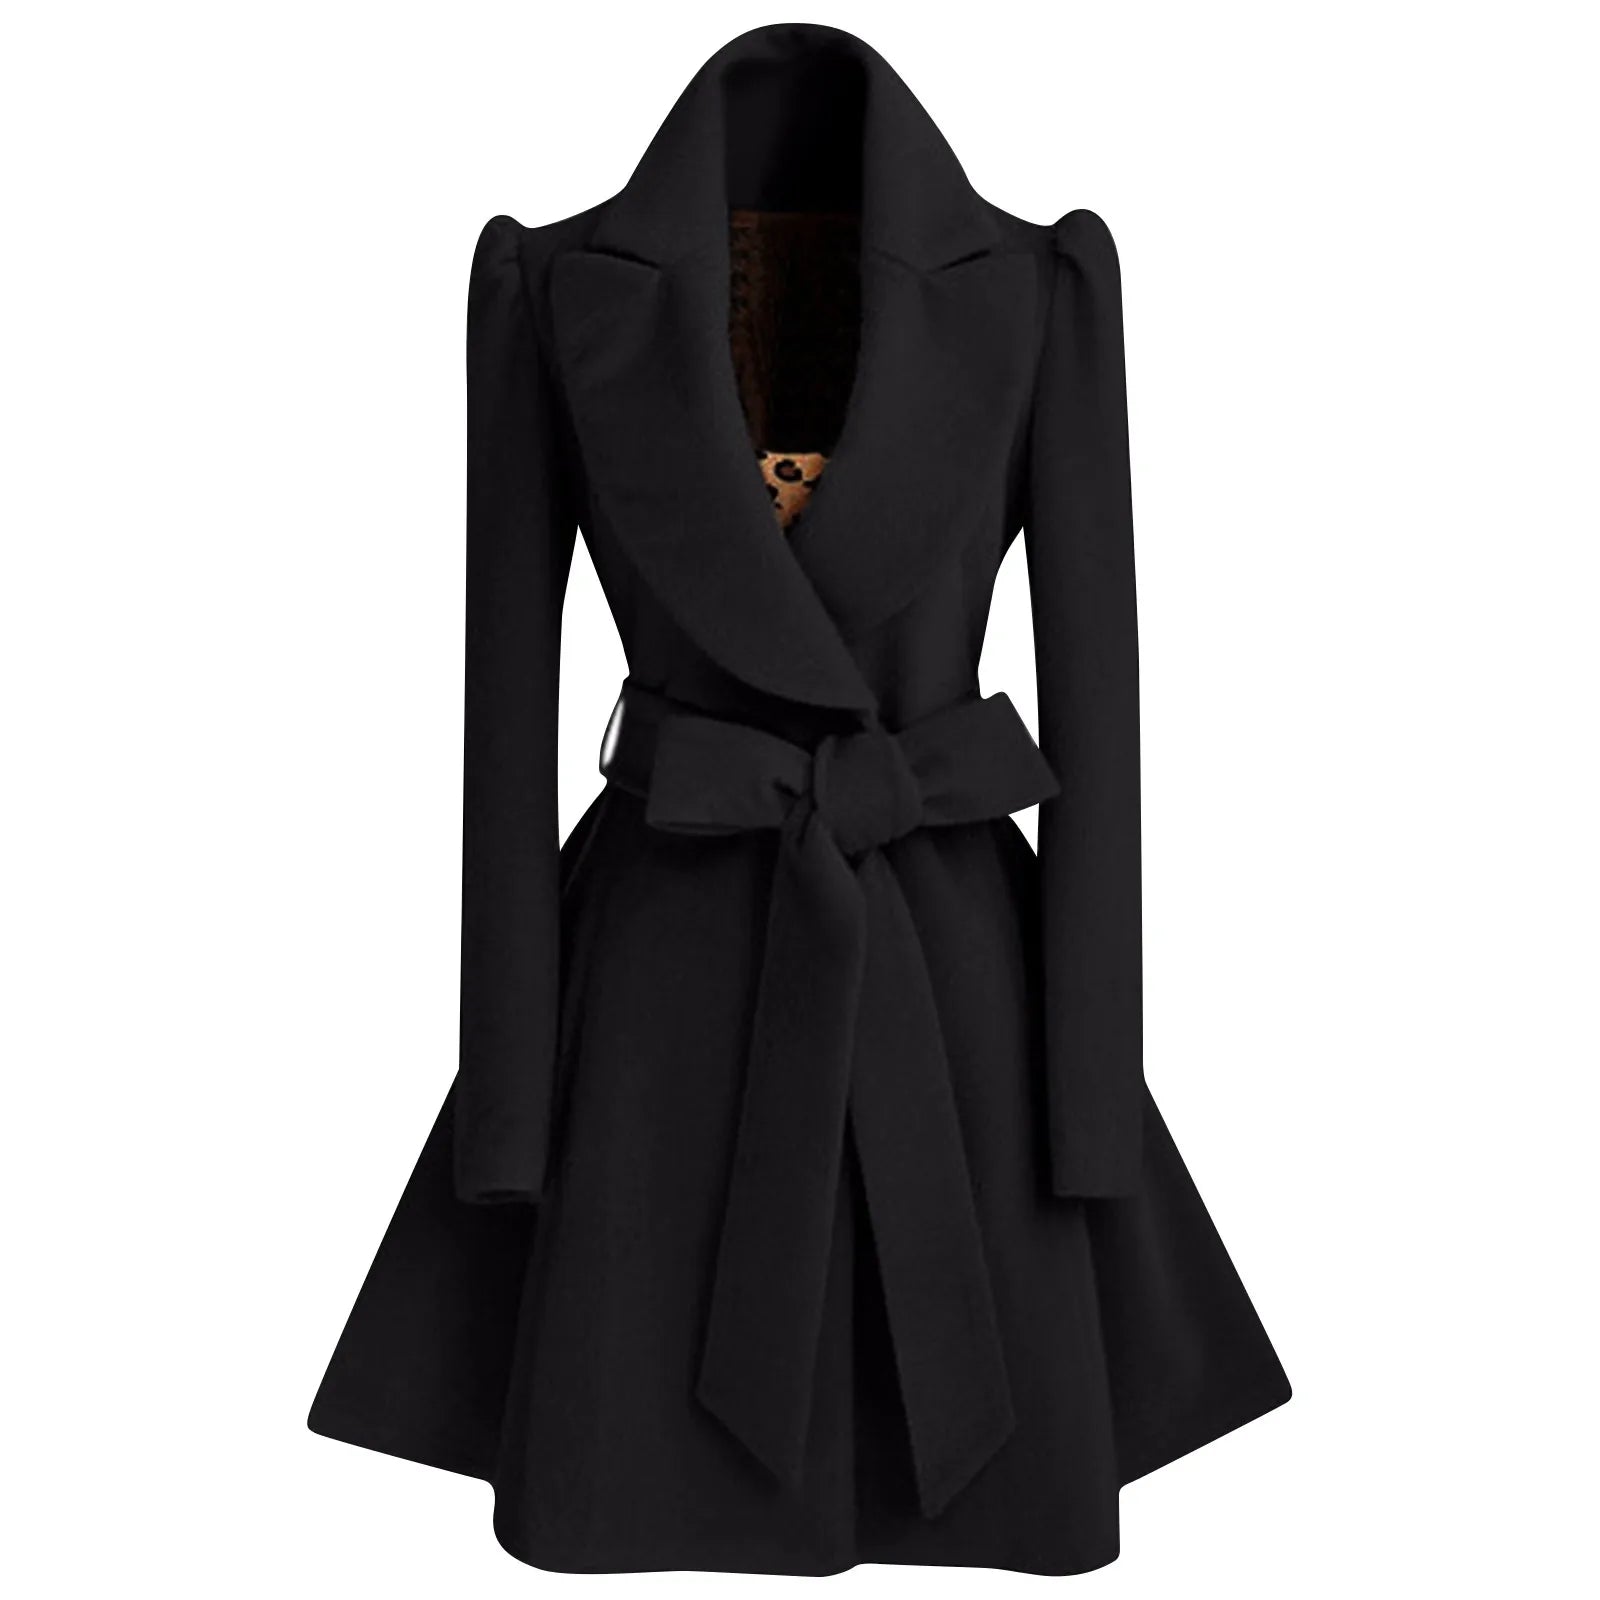 Women's Woolen Coats with Turn Down Collar and Belt 